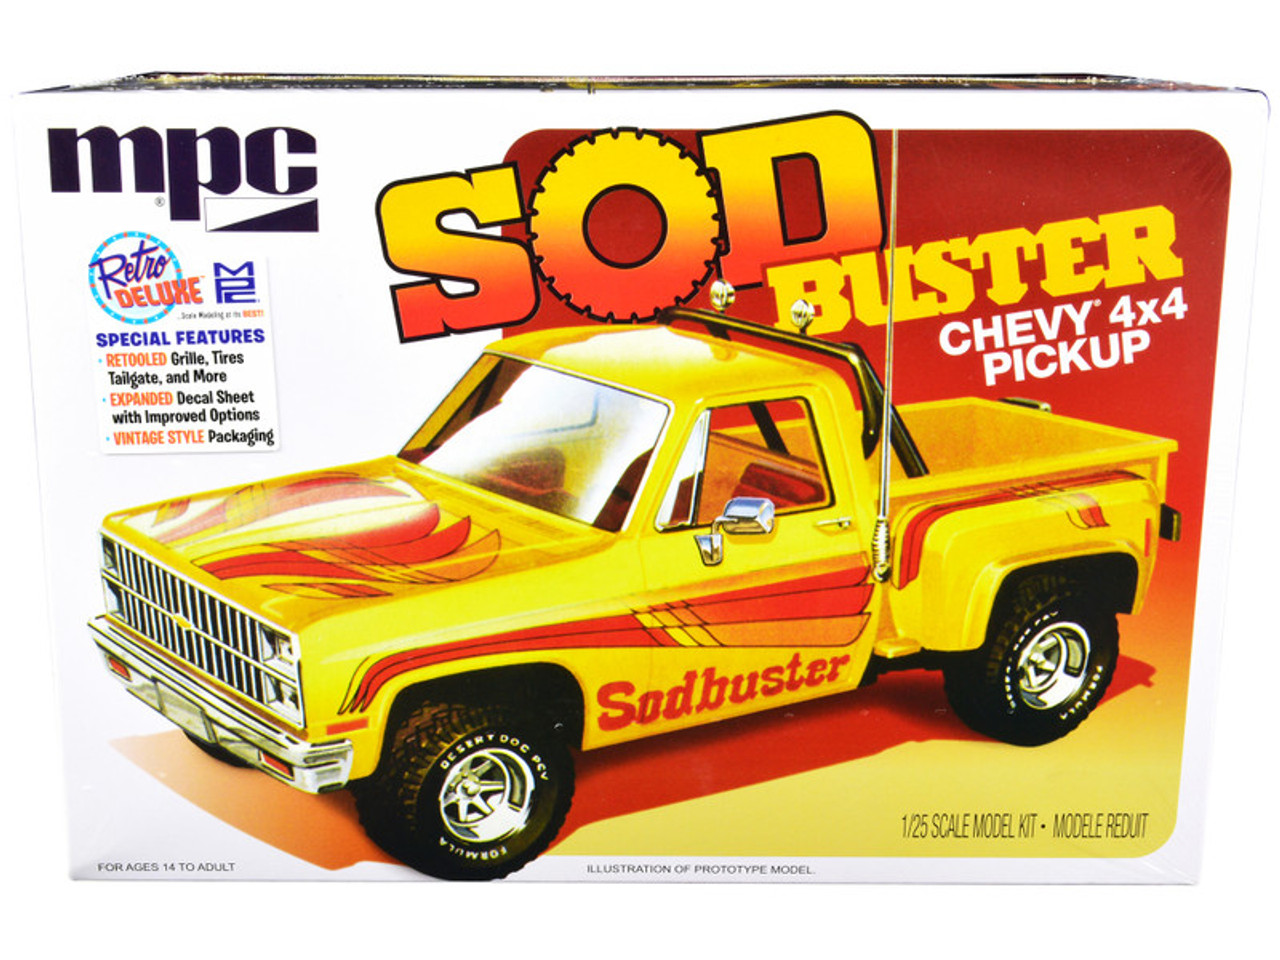 Car and Truck Plastic Model Kits. Chevy, Ford, Pontiac, Oldsmobile, Buick,  Cadillac, Mopar, Dodge Plymouth, Peterbilt, Volvo and Kenworth Trucks